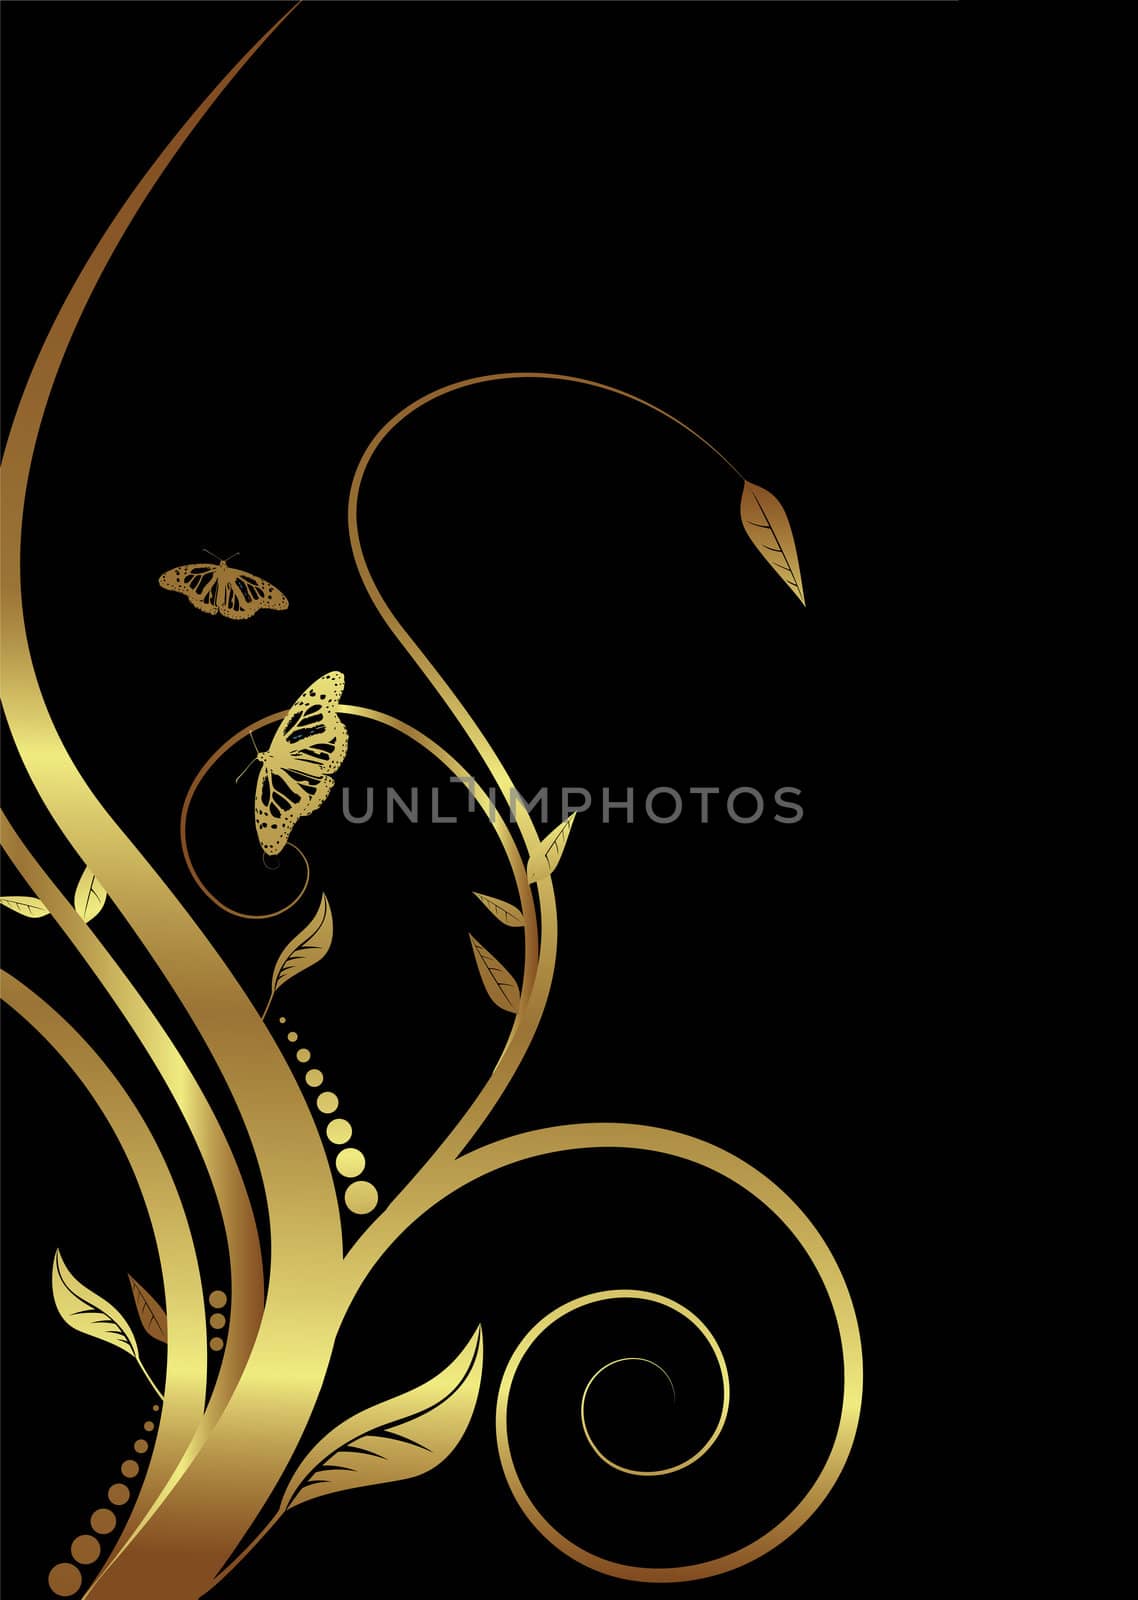 Abstract golden floral design on a black background